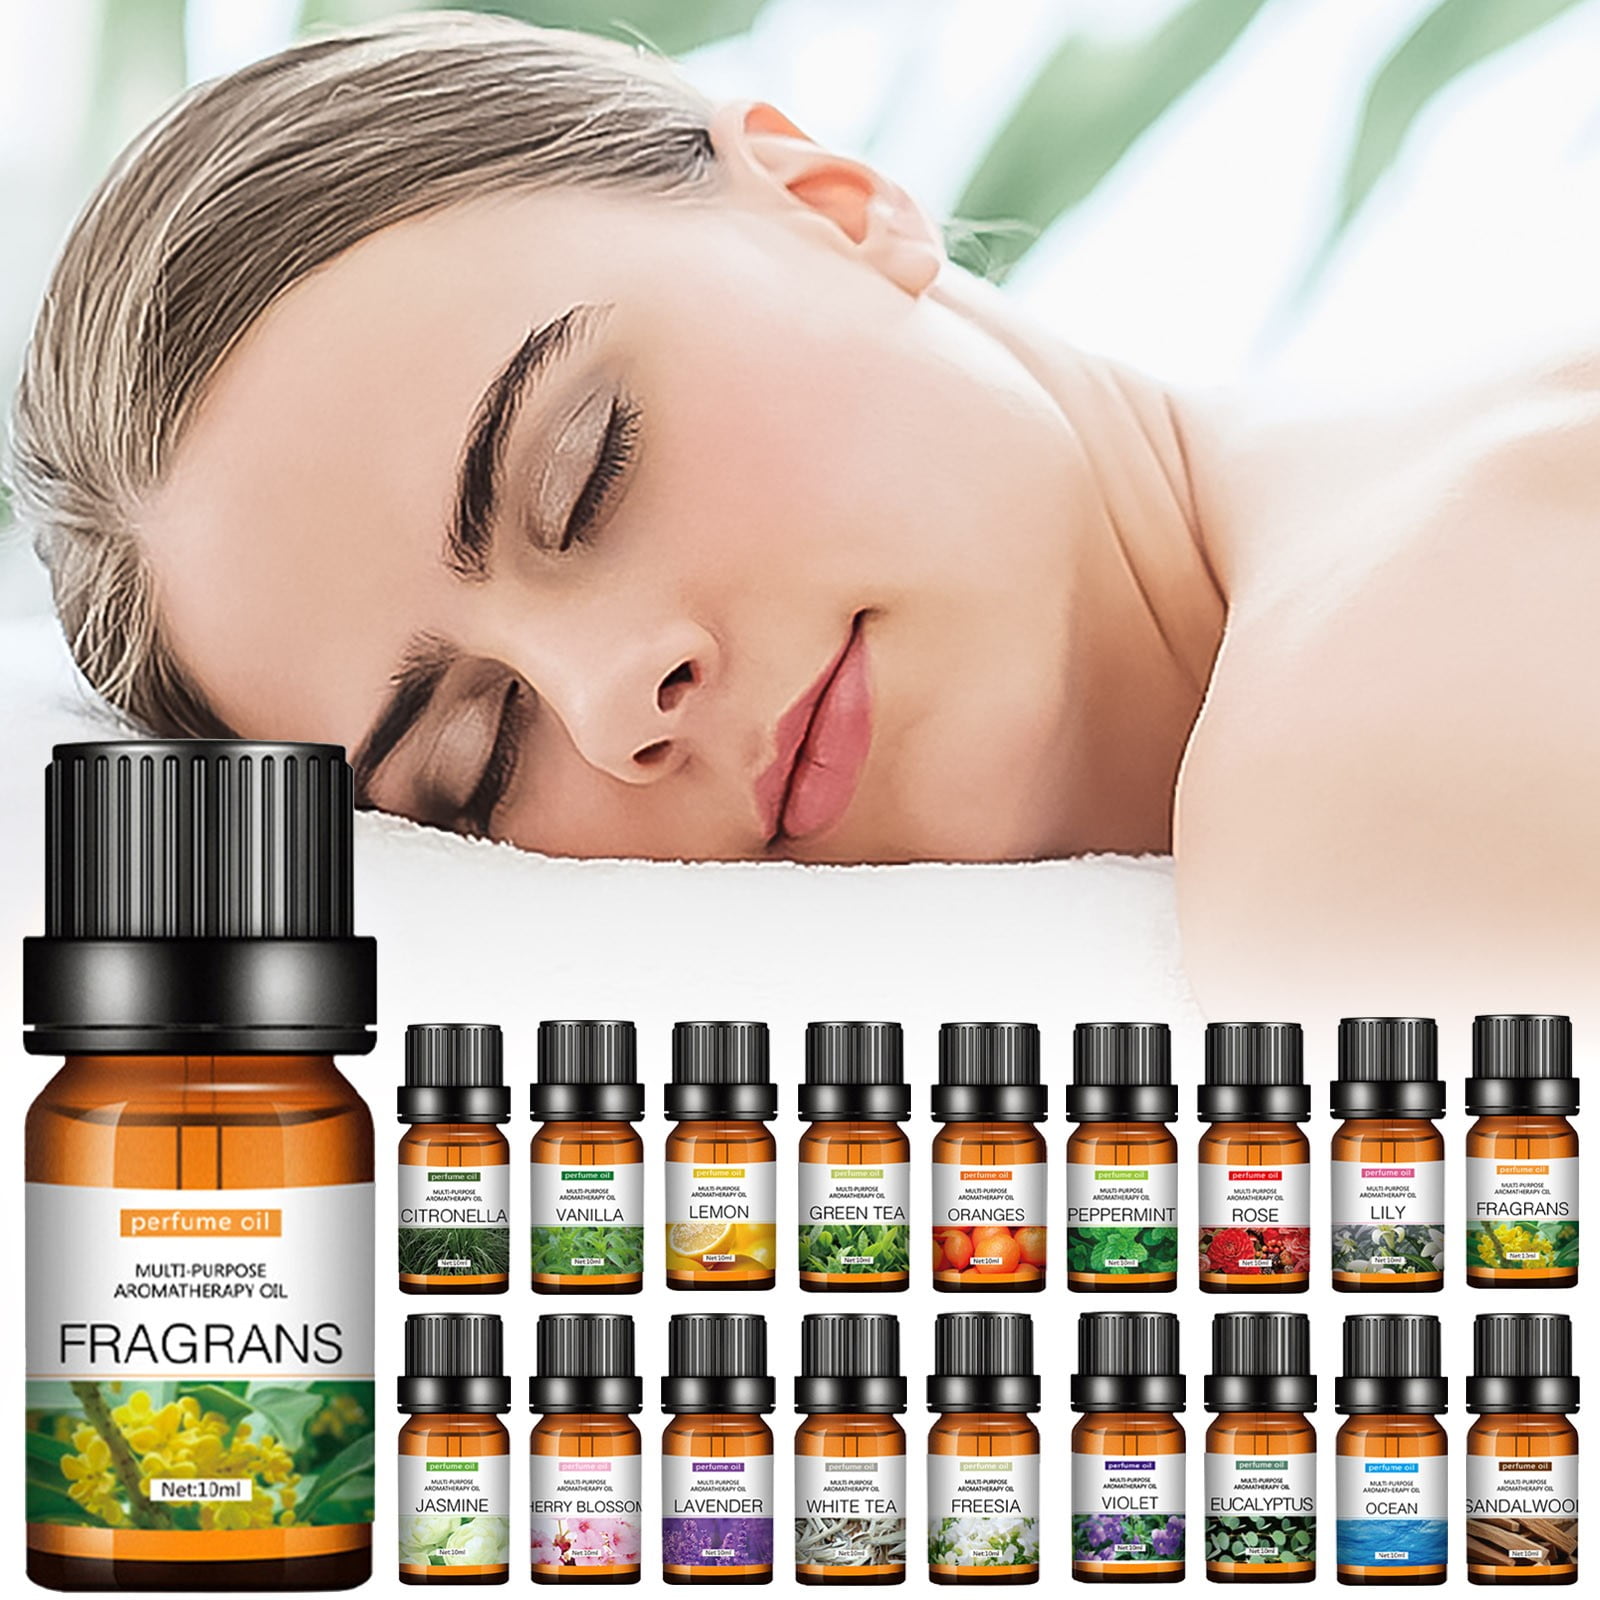 Essenza Home Fragrance Oil - Variable Scents